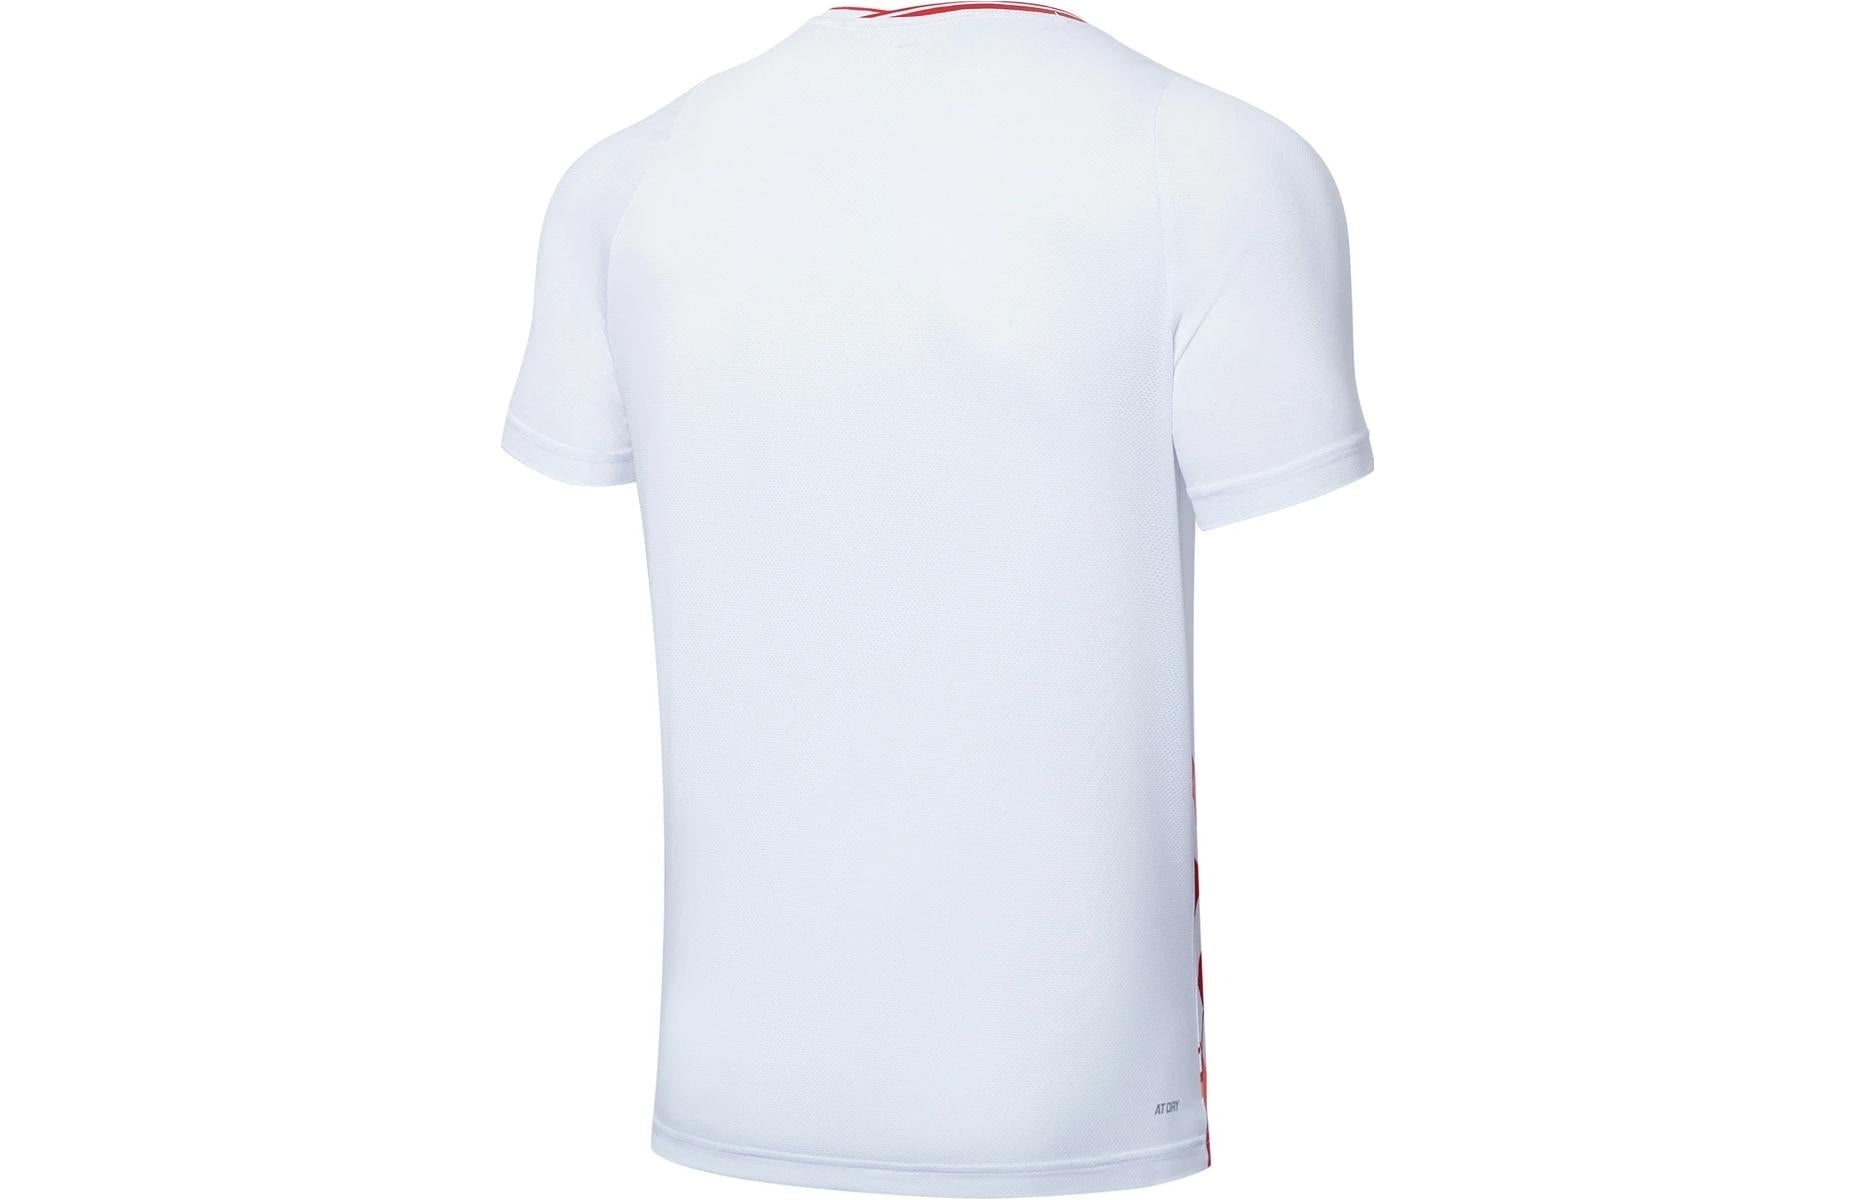 Li-Ning Graphic Badminton Competition T-shirt 'White Red' AAYT057-1 - 2